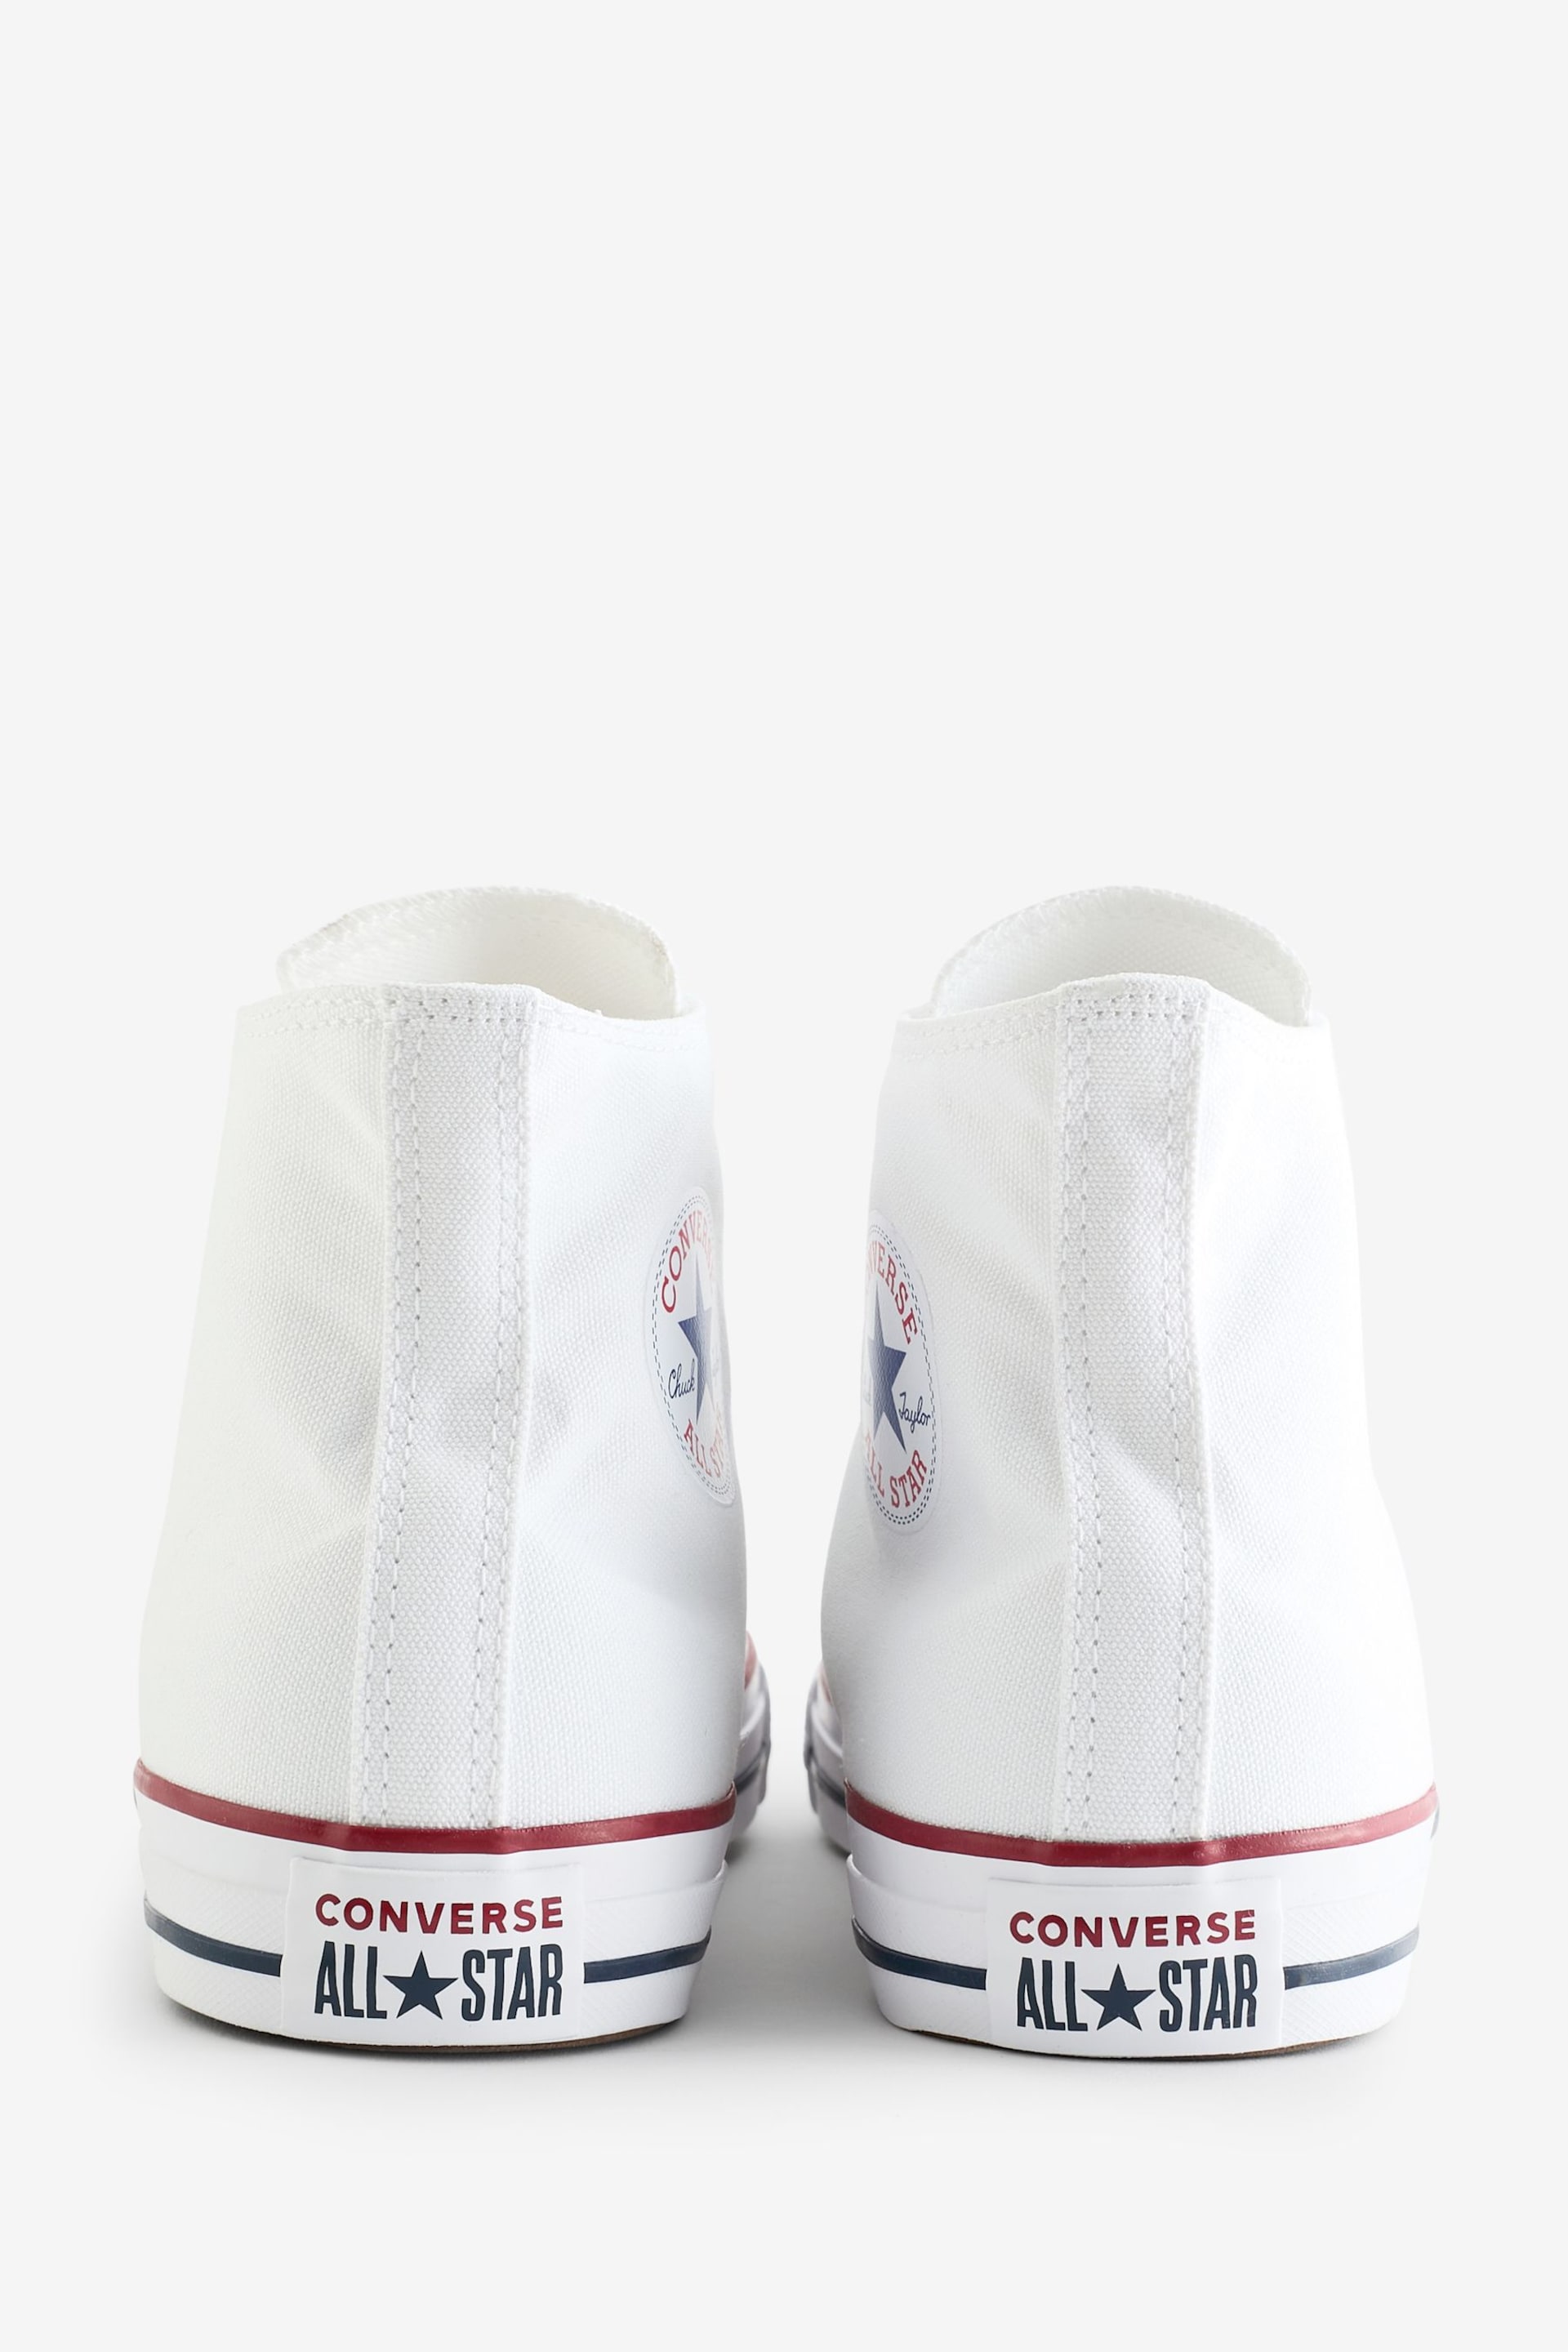 Converse White Chuck Taylor All Star Wide High Top Trainers - Image 4 of 8